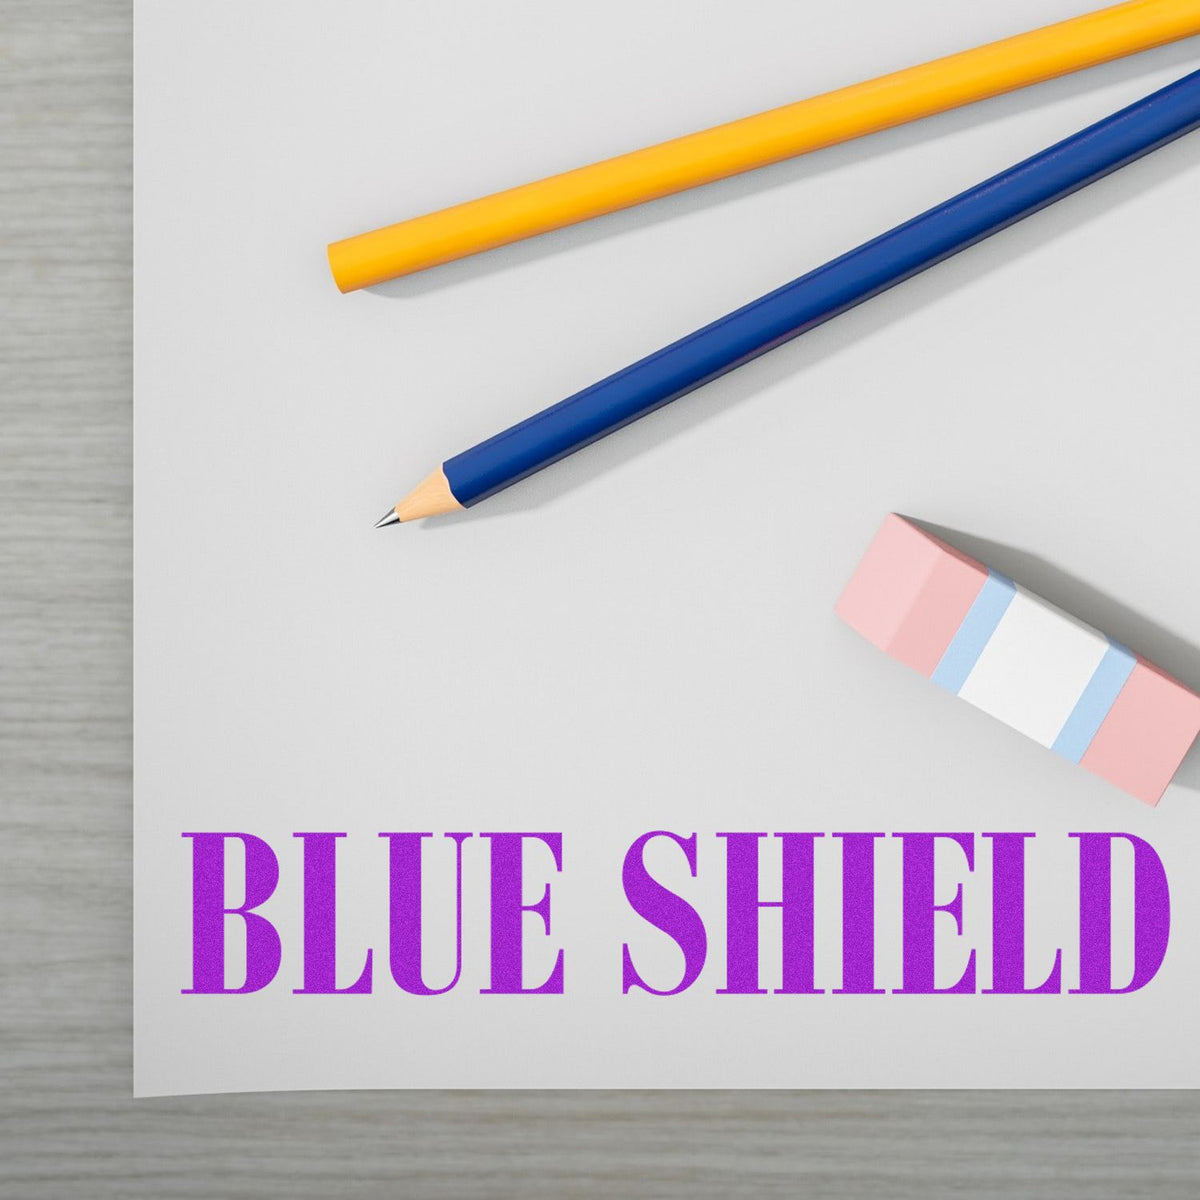 Blue Shield Rubber Stamp In Use